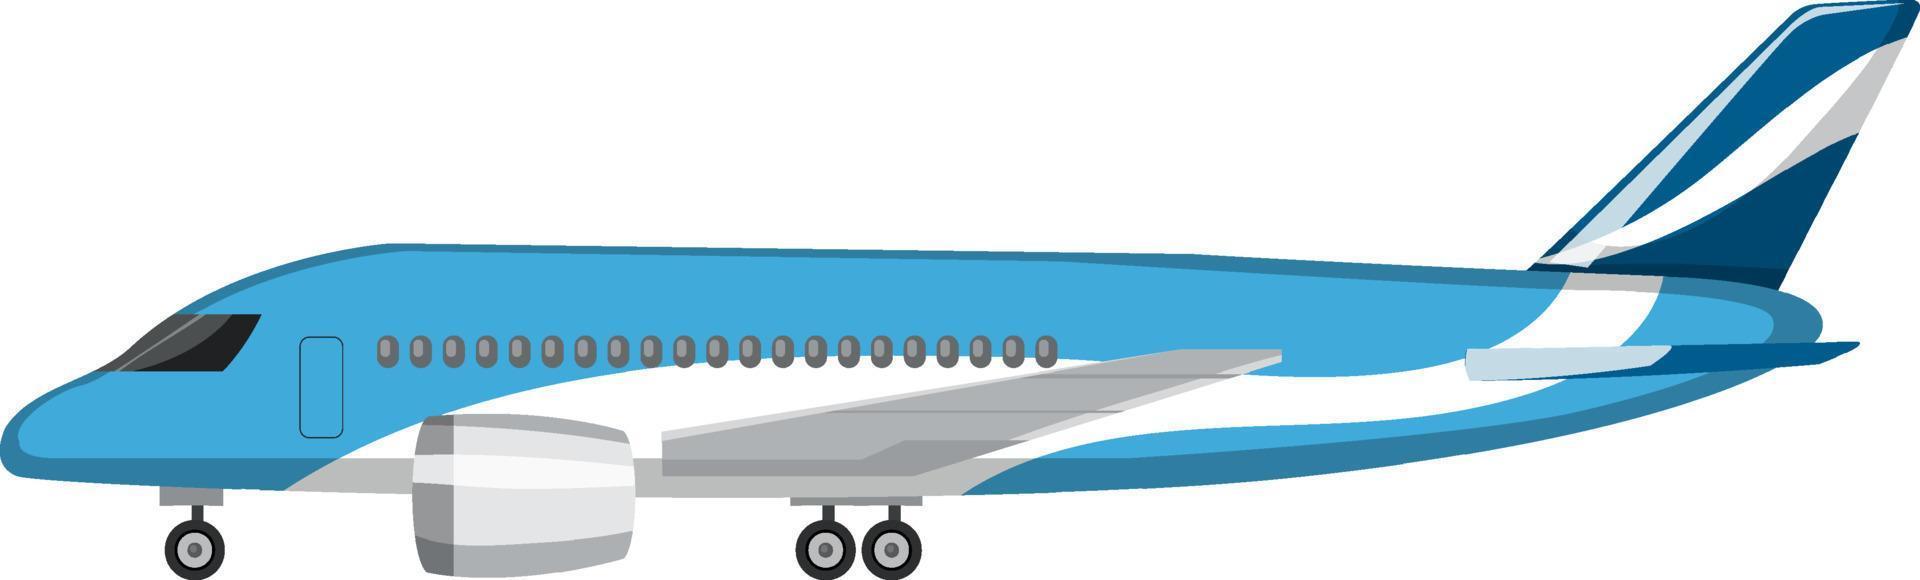 Airplane in cartoon style on white background vector